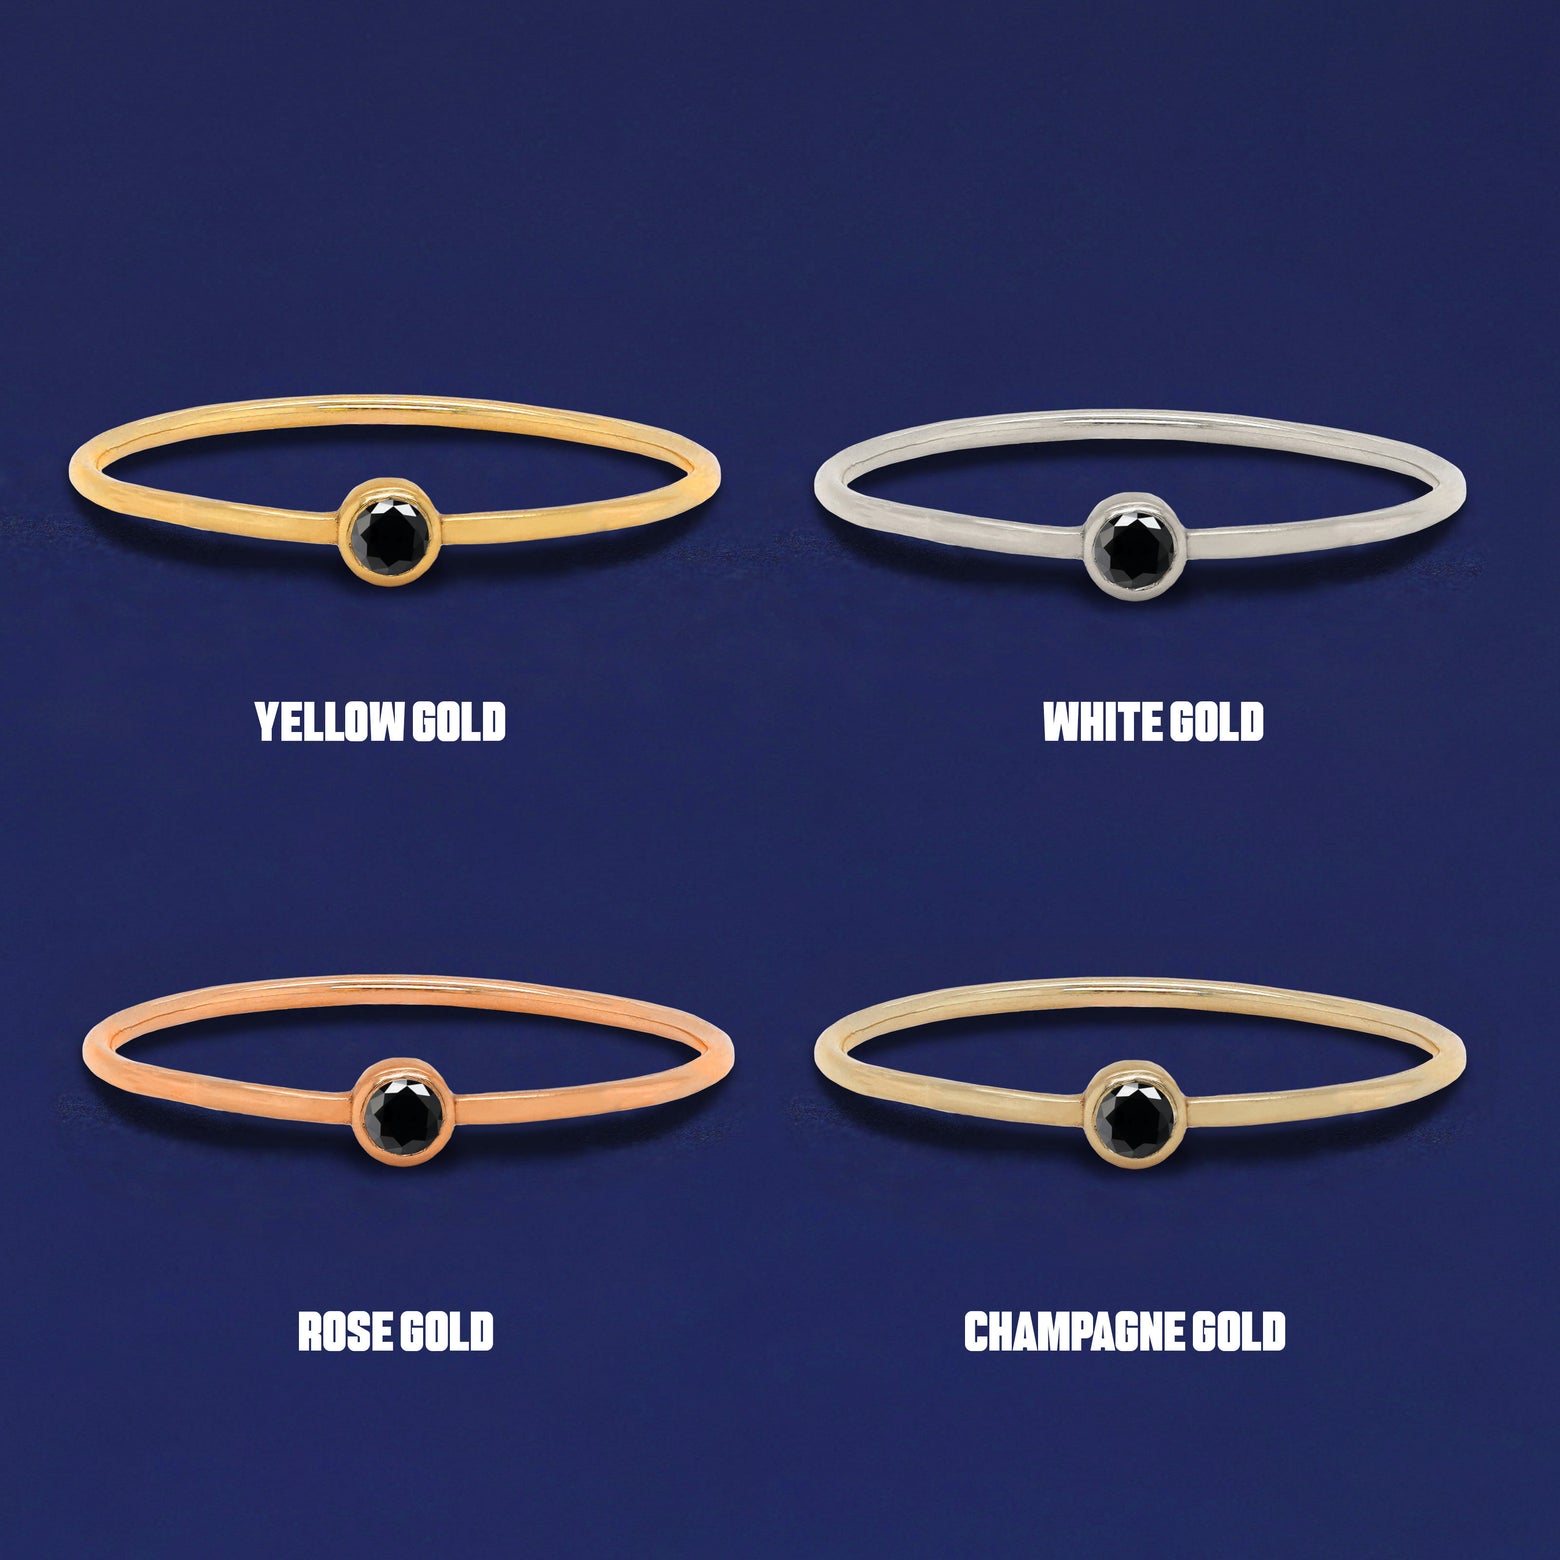 Four versions of the Black Diamond Ring shown in options of yellow, white, rose and champagne gold